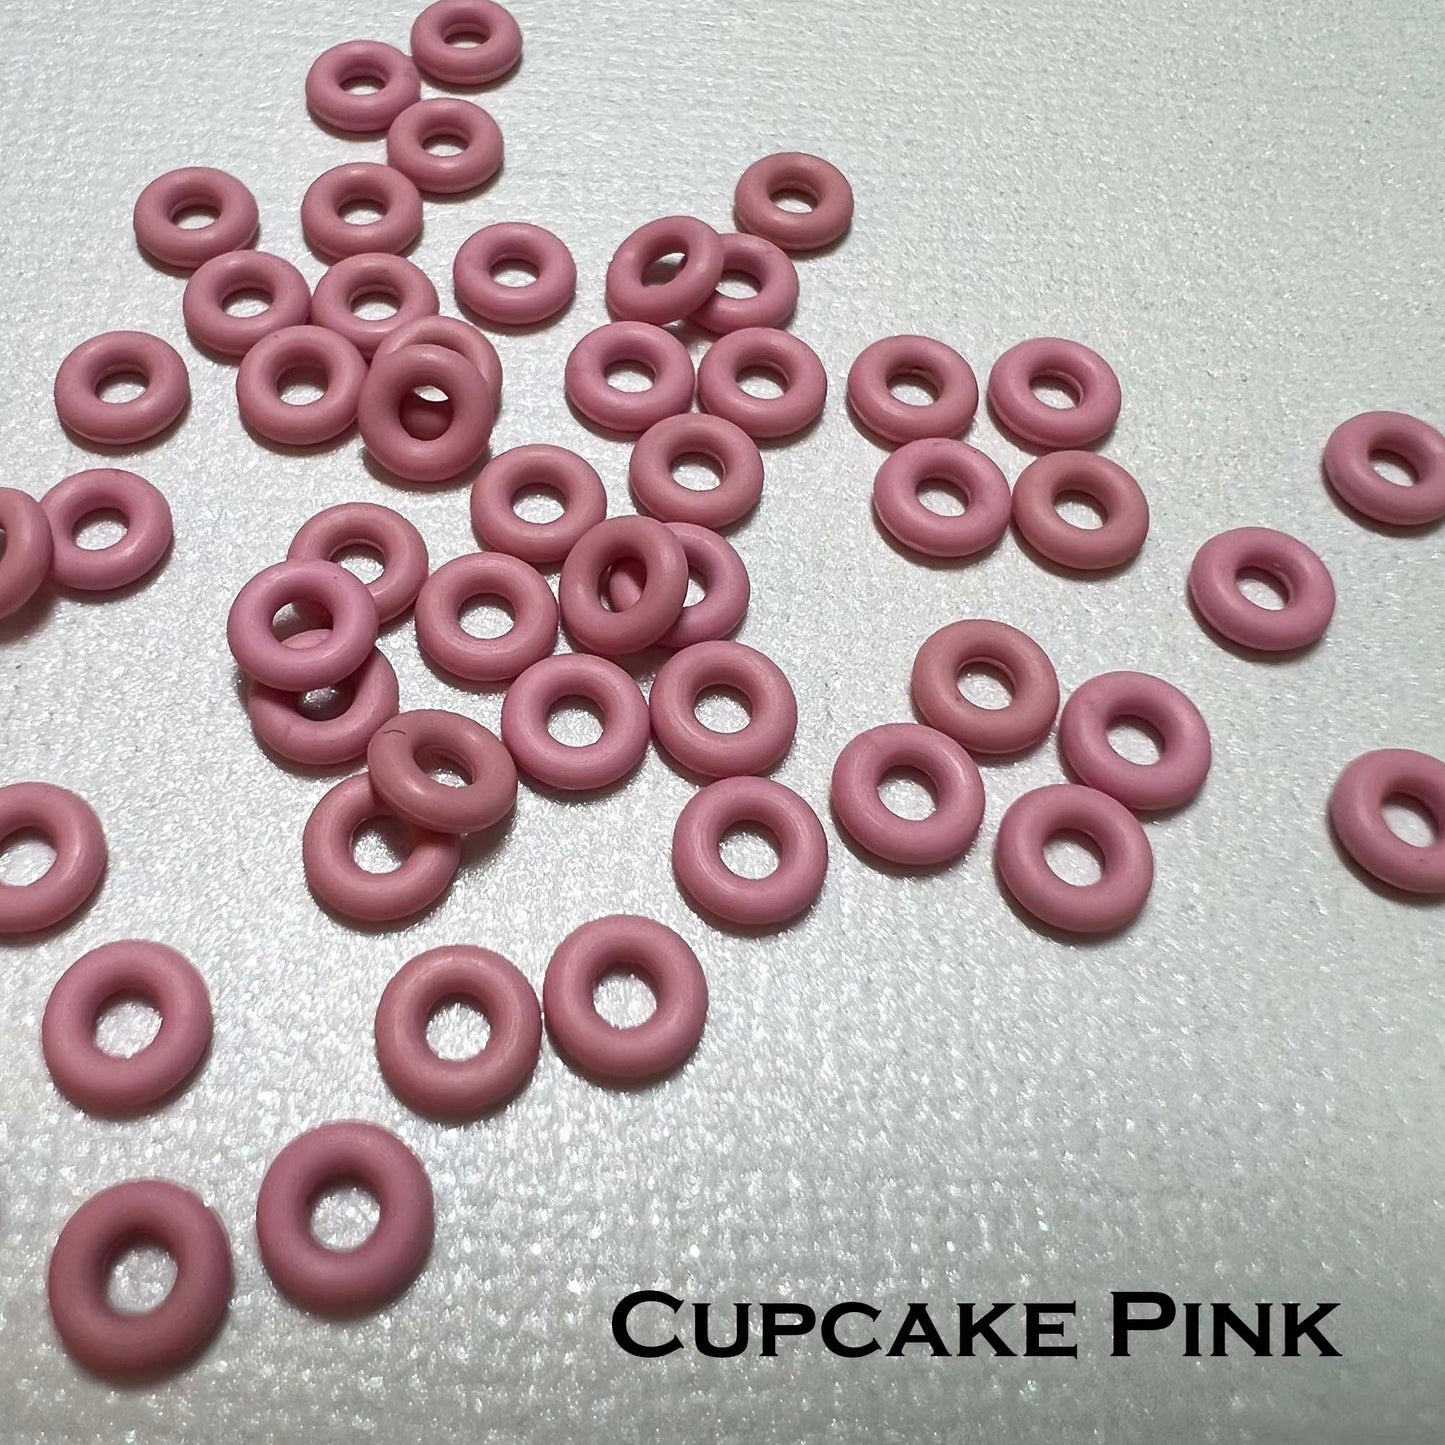 5mm Rubber O-Rings (ID: 2mm)  - choose color & quantity